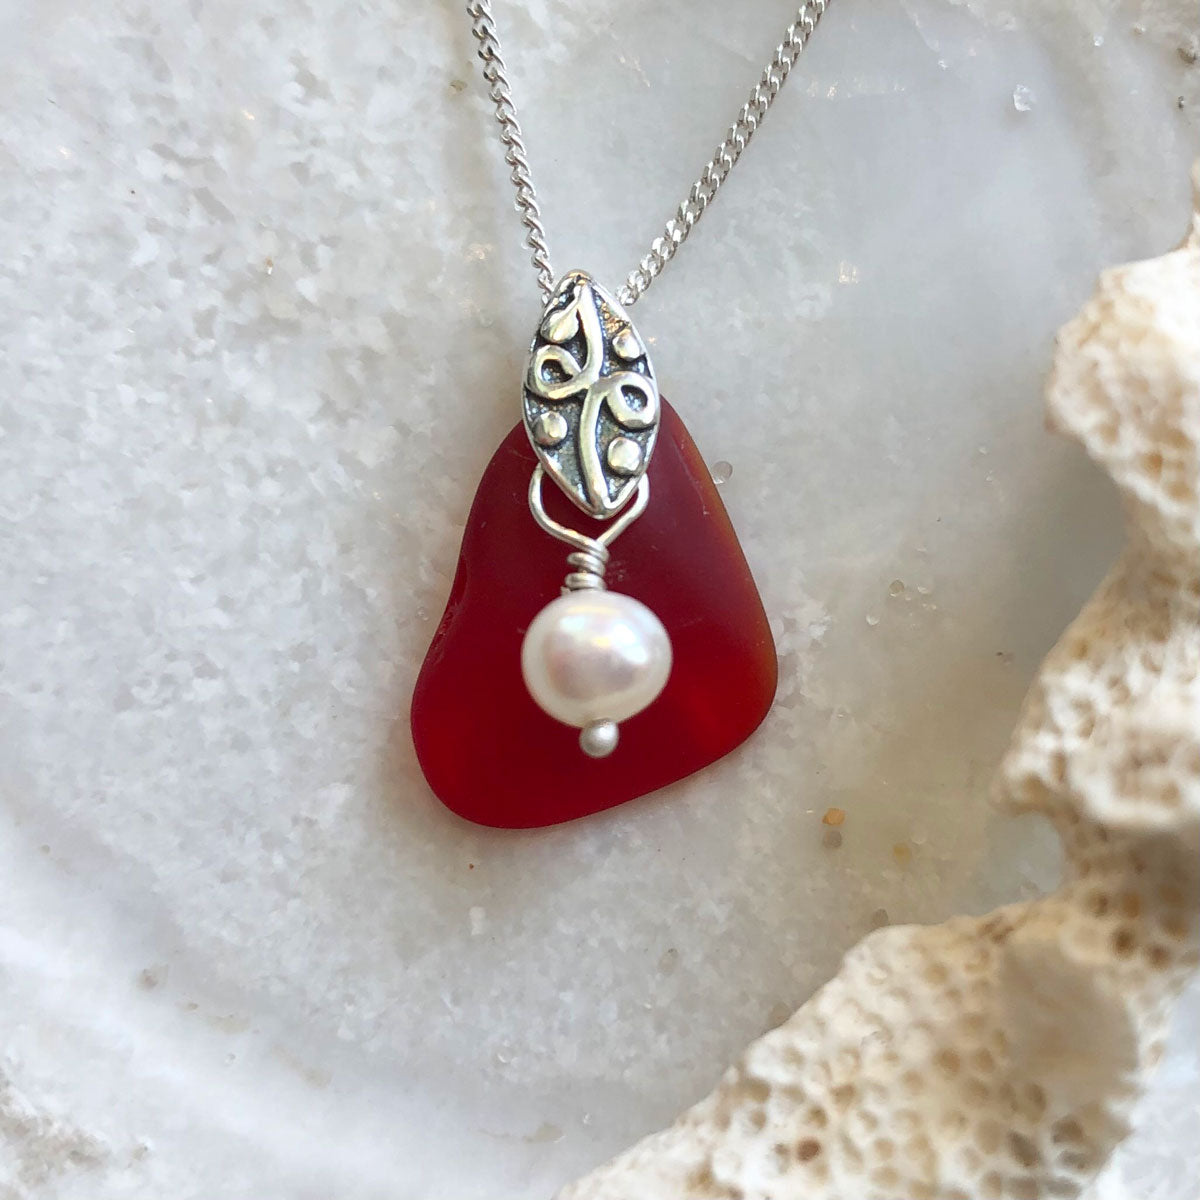 Red Sea Glass Necklace with Freshwater Pearl